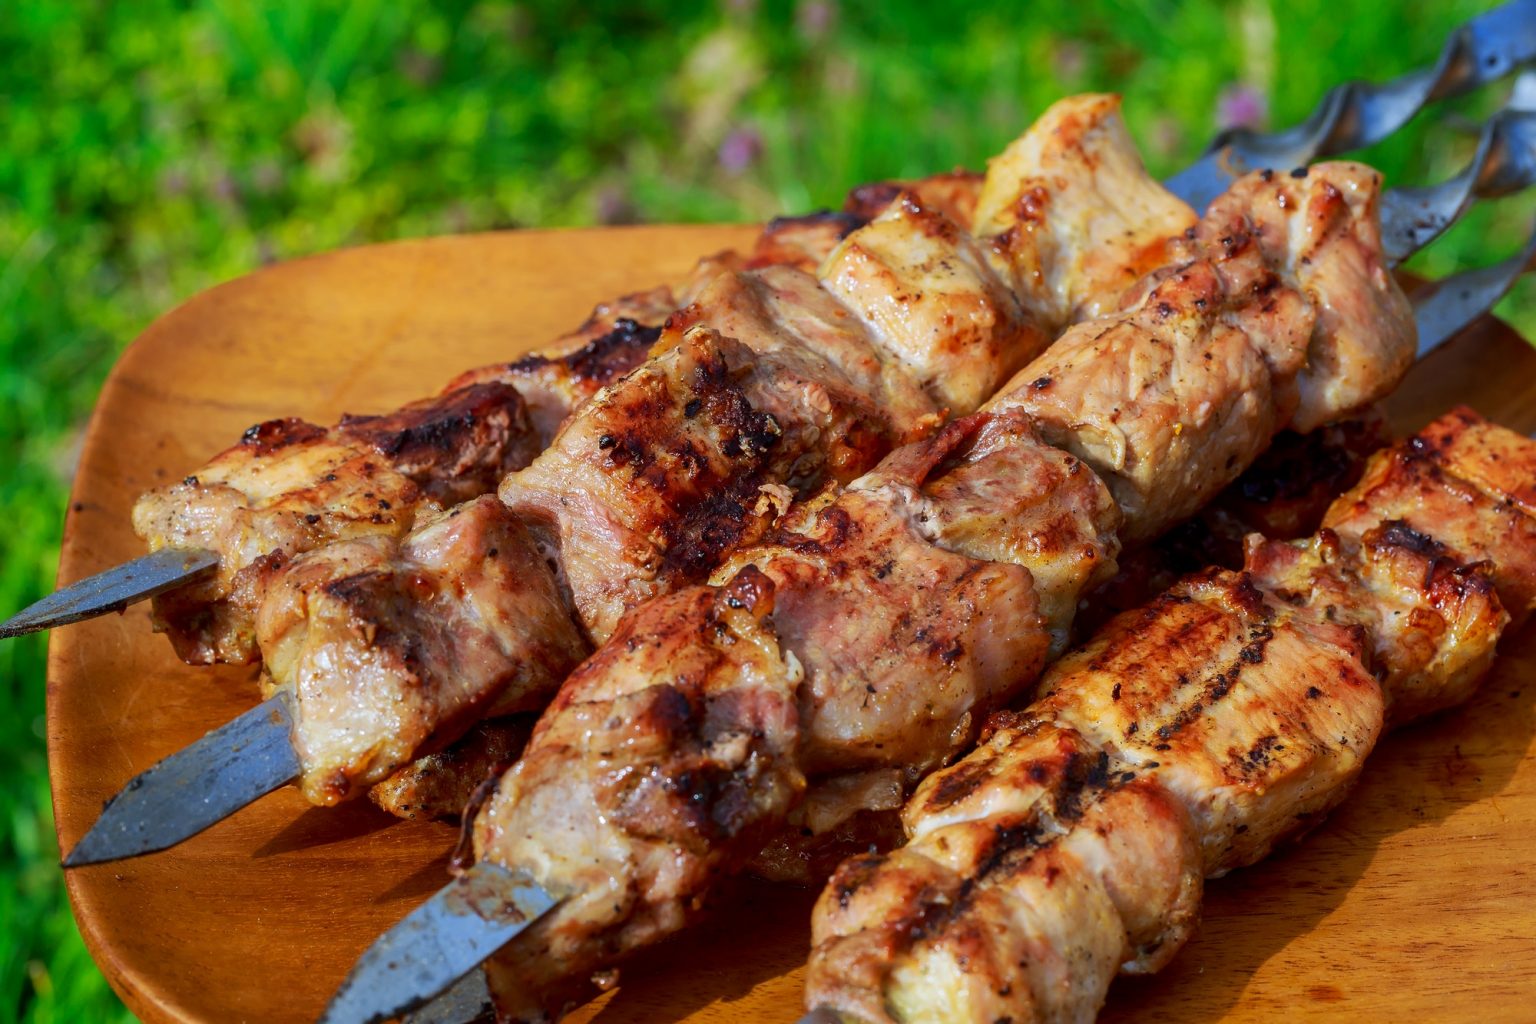 closeup of some meat skewers being grilled in a barbecue